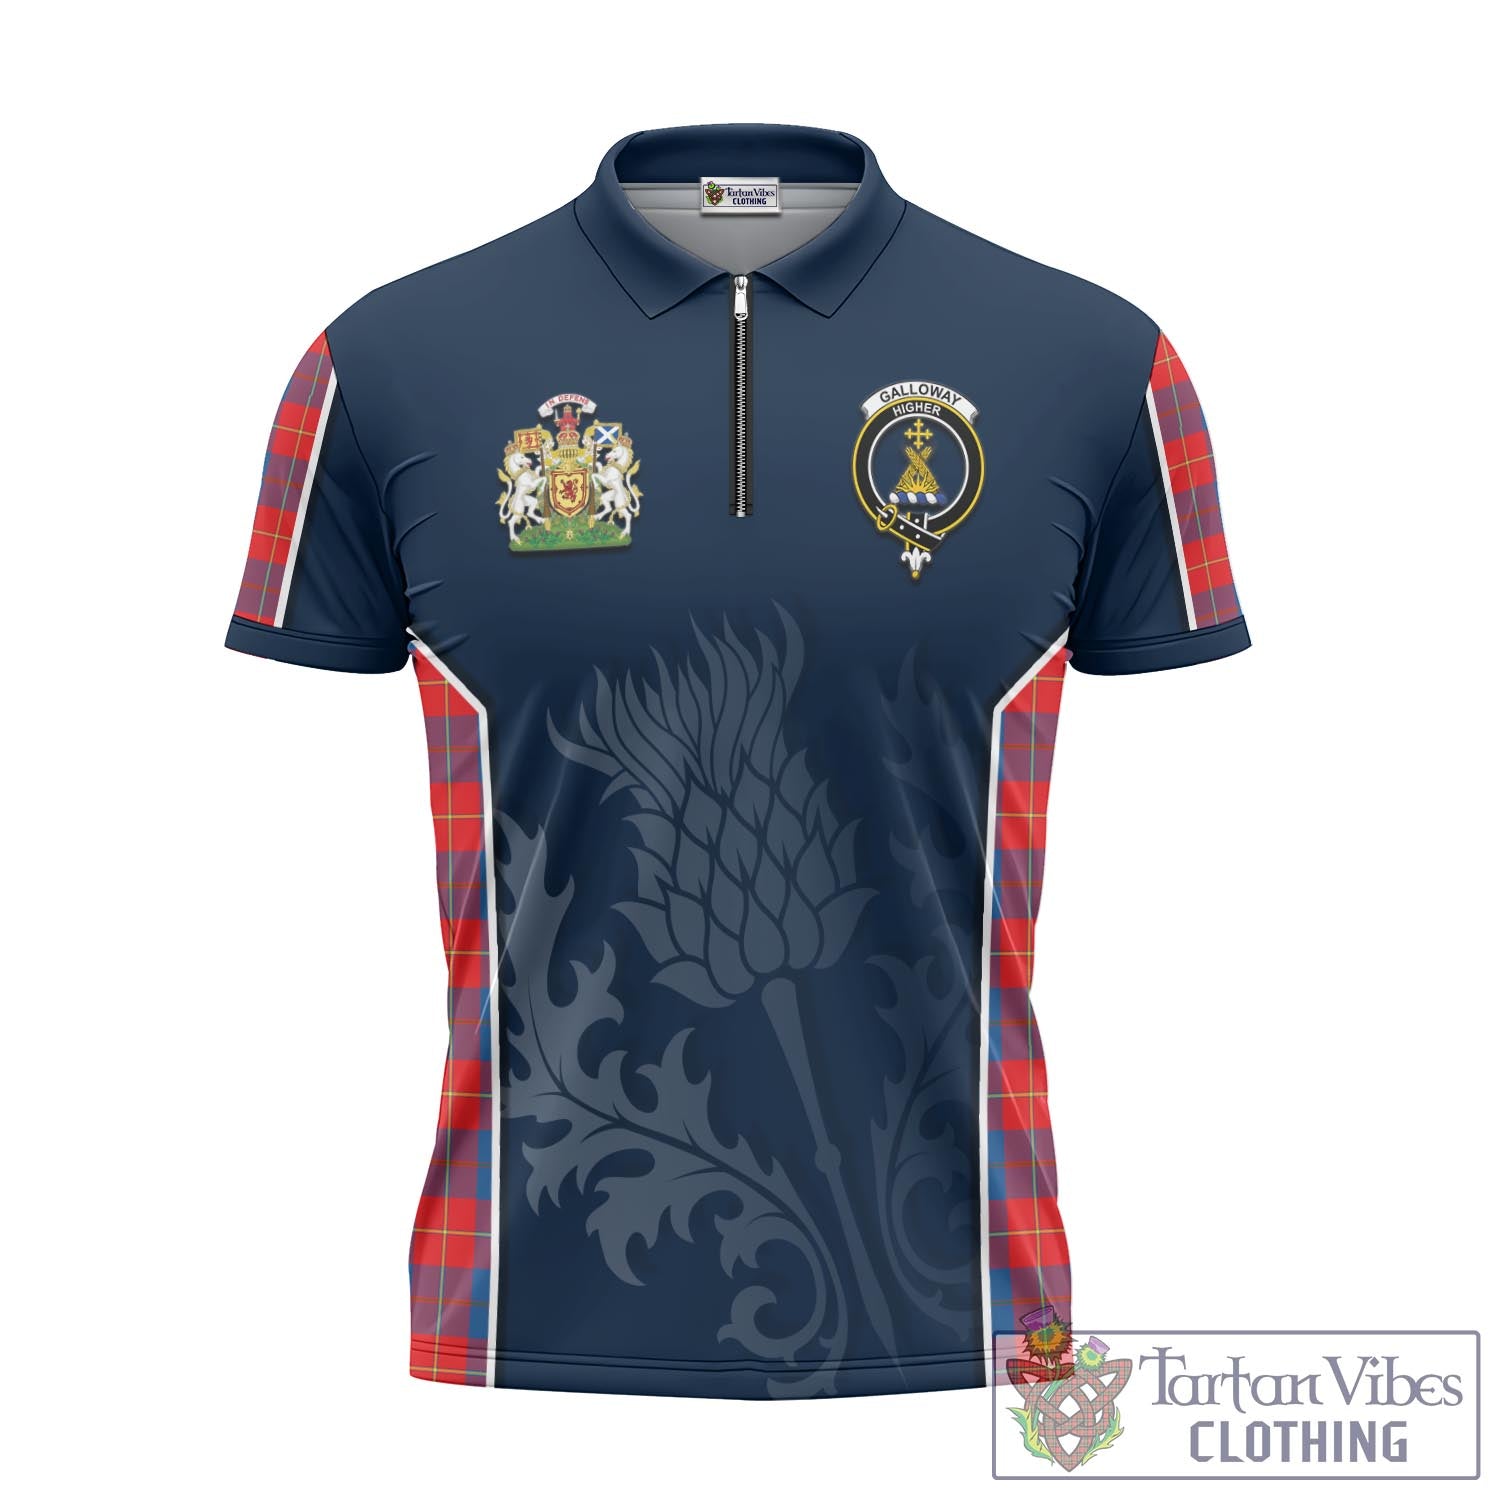 Tartan Vibes Clothing Galloway Red Tartan Zipper Polo Shirt with Family Crest and Scottish Thistle Vibes Sport Style